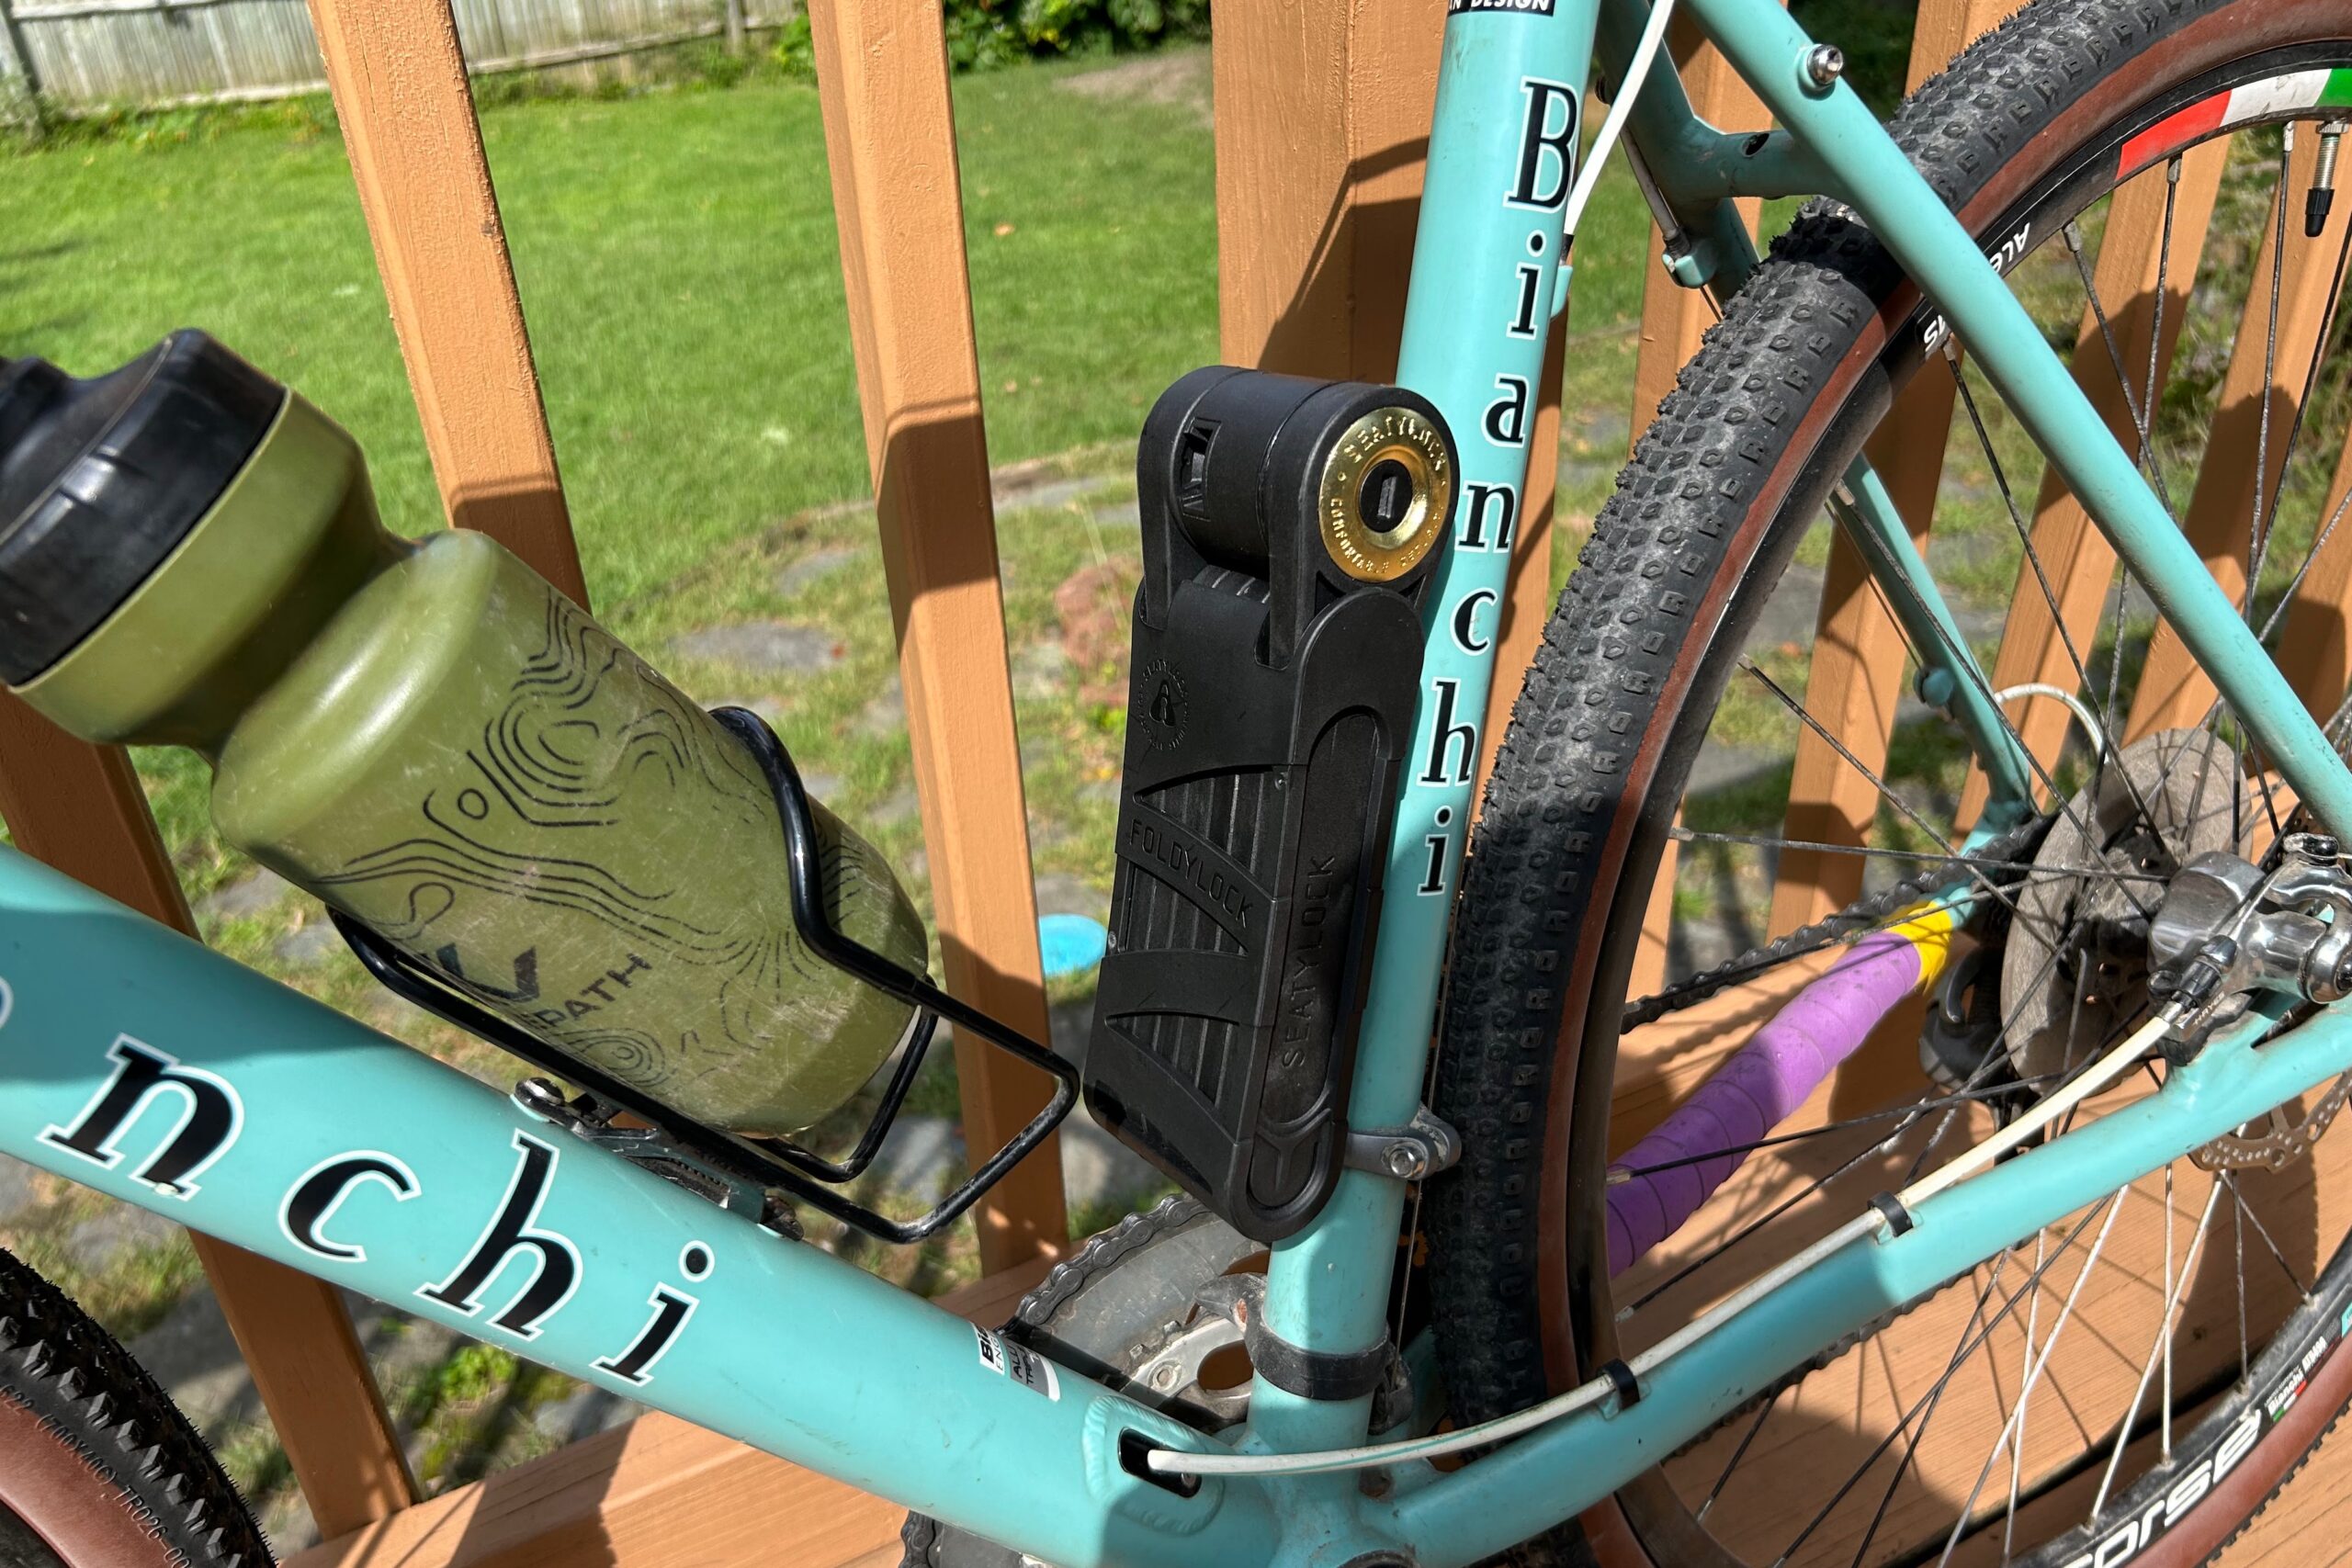 Top 12 Bike Locks: Finest Theft Protection and Buying Guide 2023